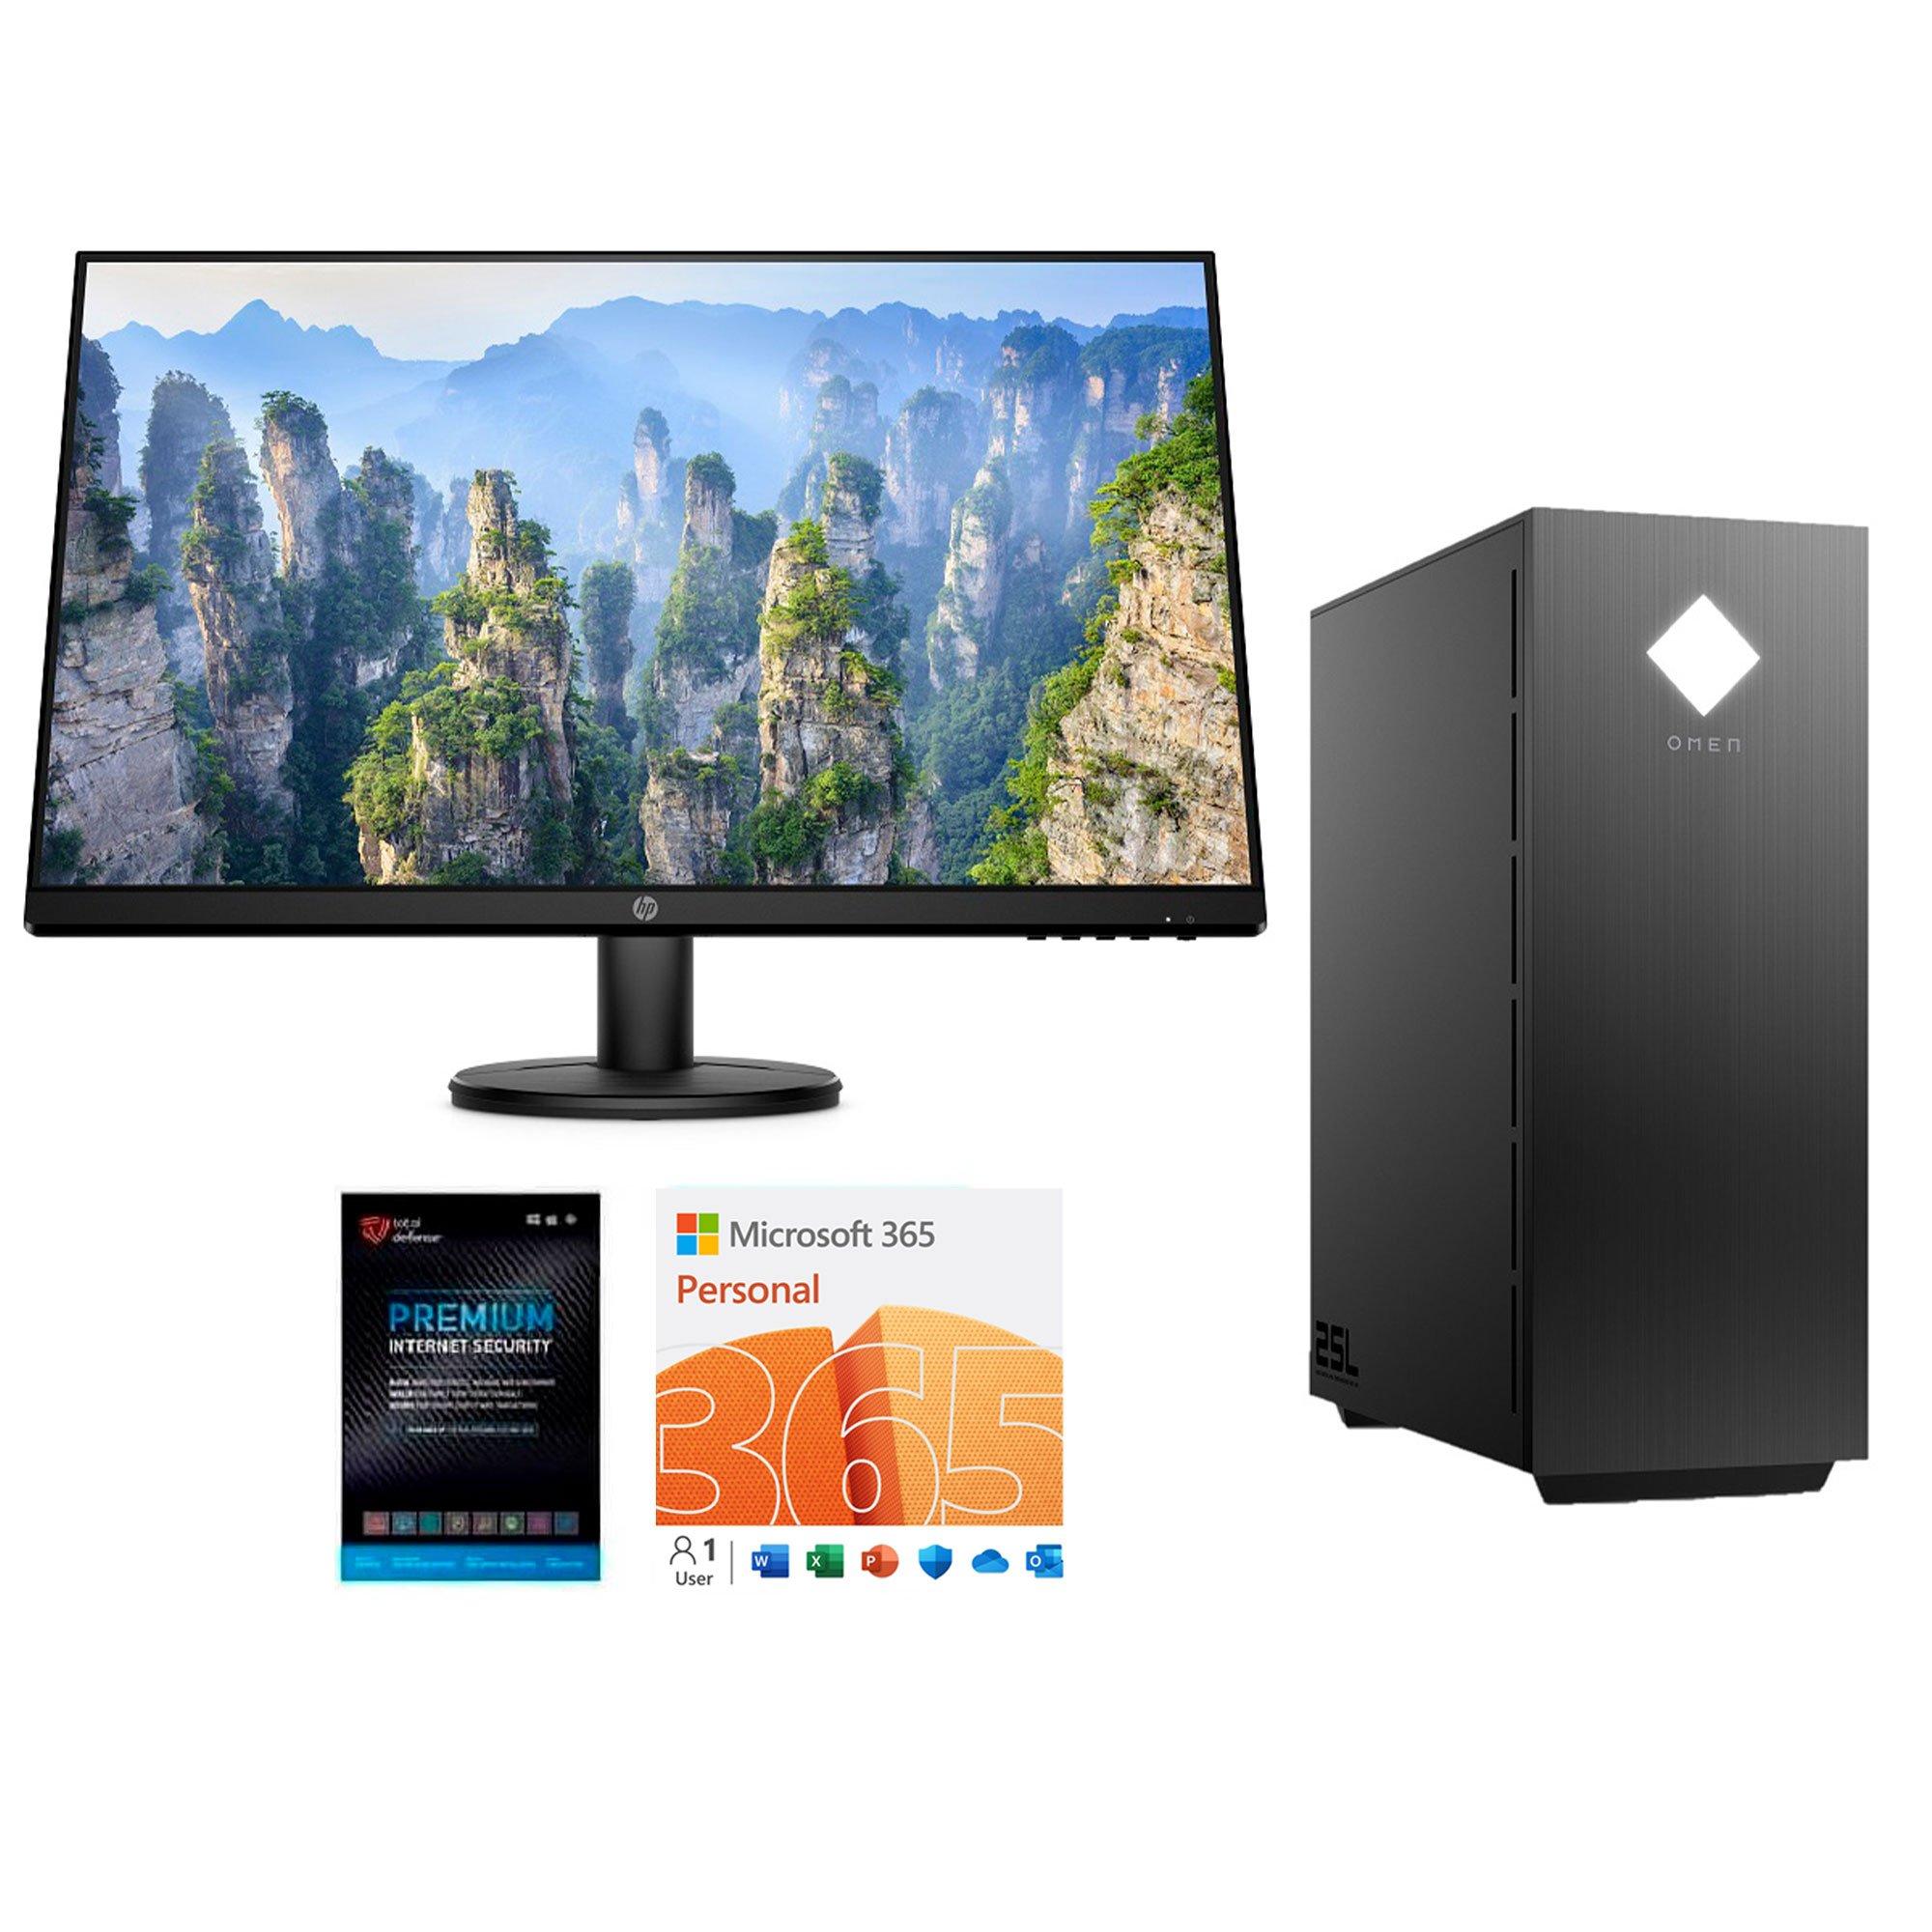 to Own HP Omen Gaming Desktop w/ Ryzen™ 5 CPU, RX5500 27" Monitor, Microsoft 365 & Total Defense at Aaron's today!